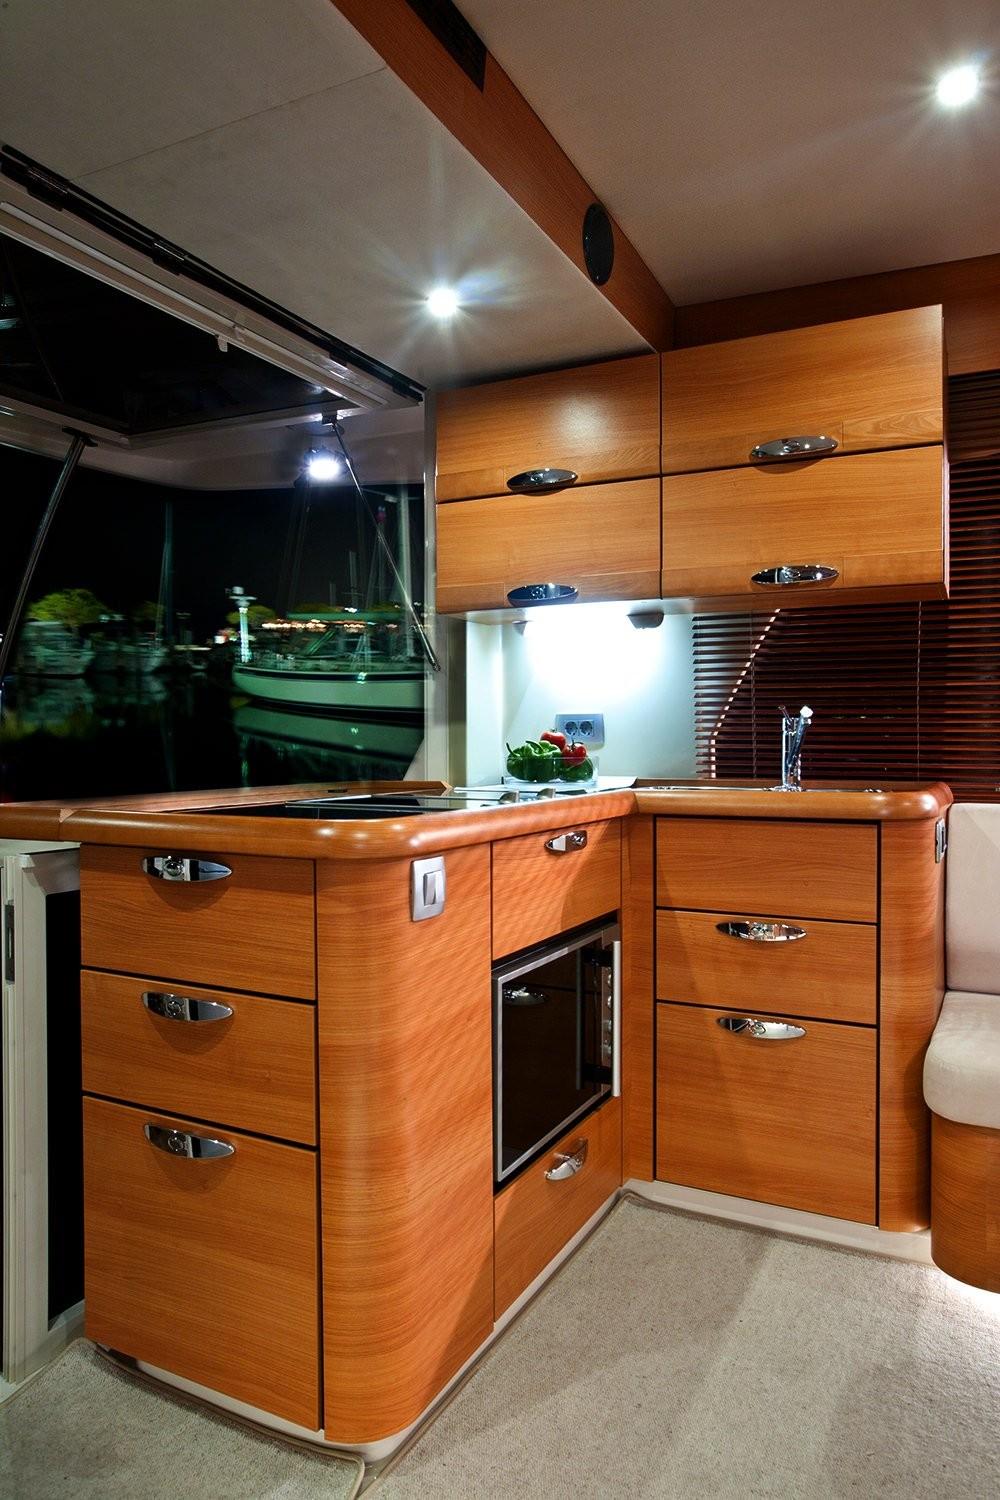 Manufacturer Provided Image: Greenline 40 Galley